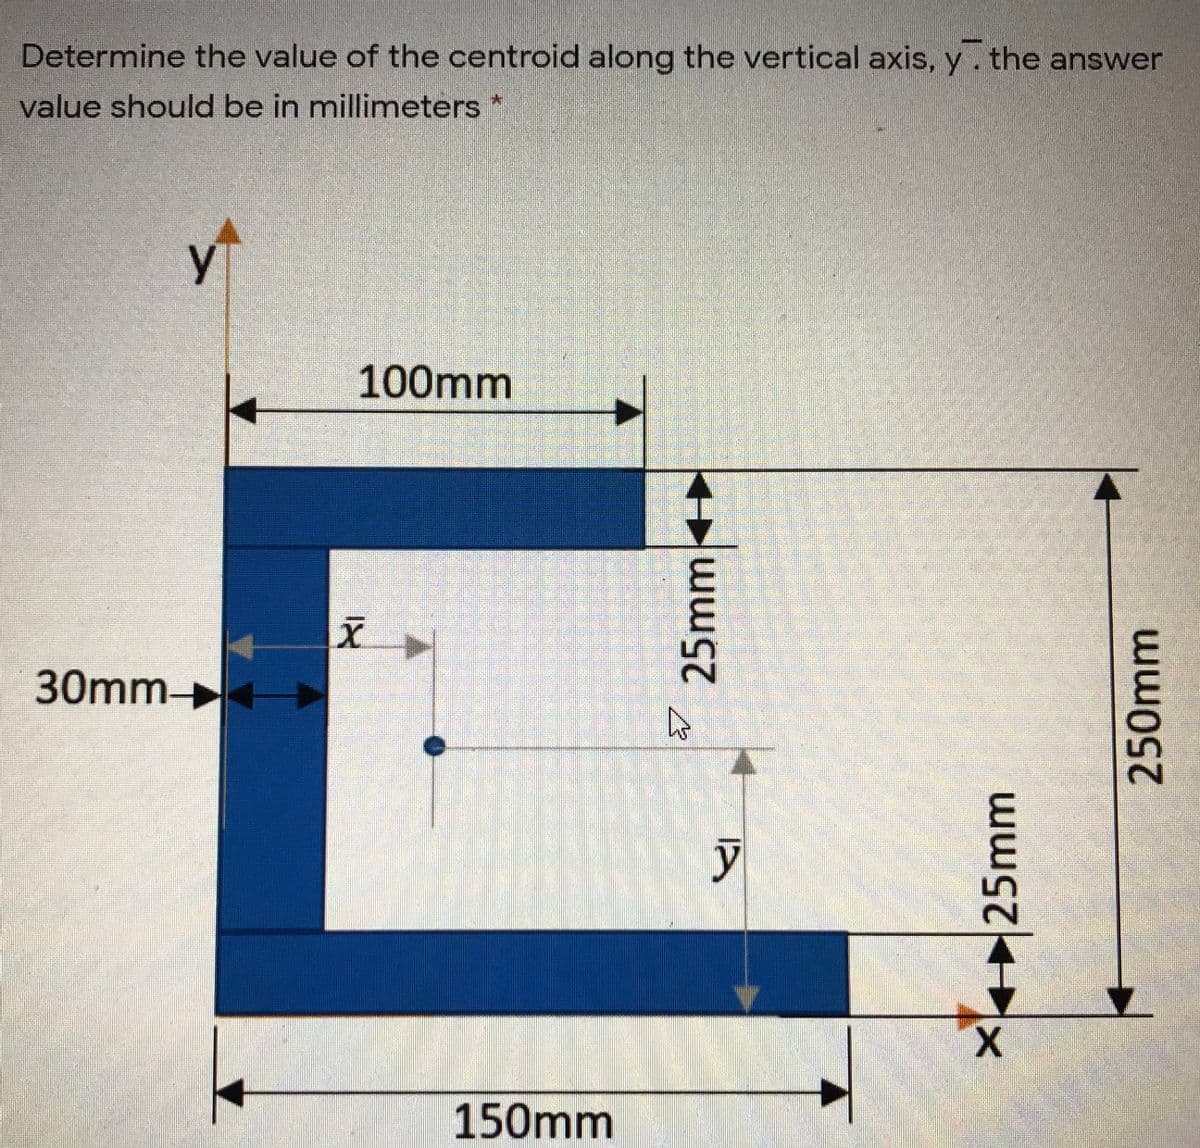 Determine the value of the centroid along the vertical axis, y. the answer
value should be in millimeters
y
100mm
30mm
150mm
25mm
X25mm
250mm
